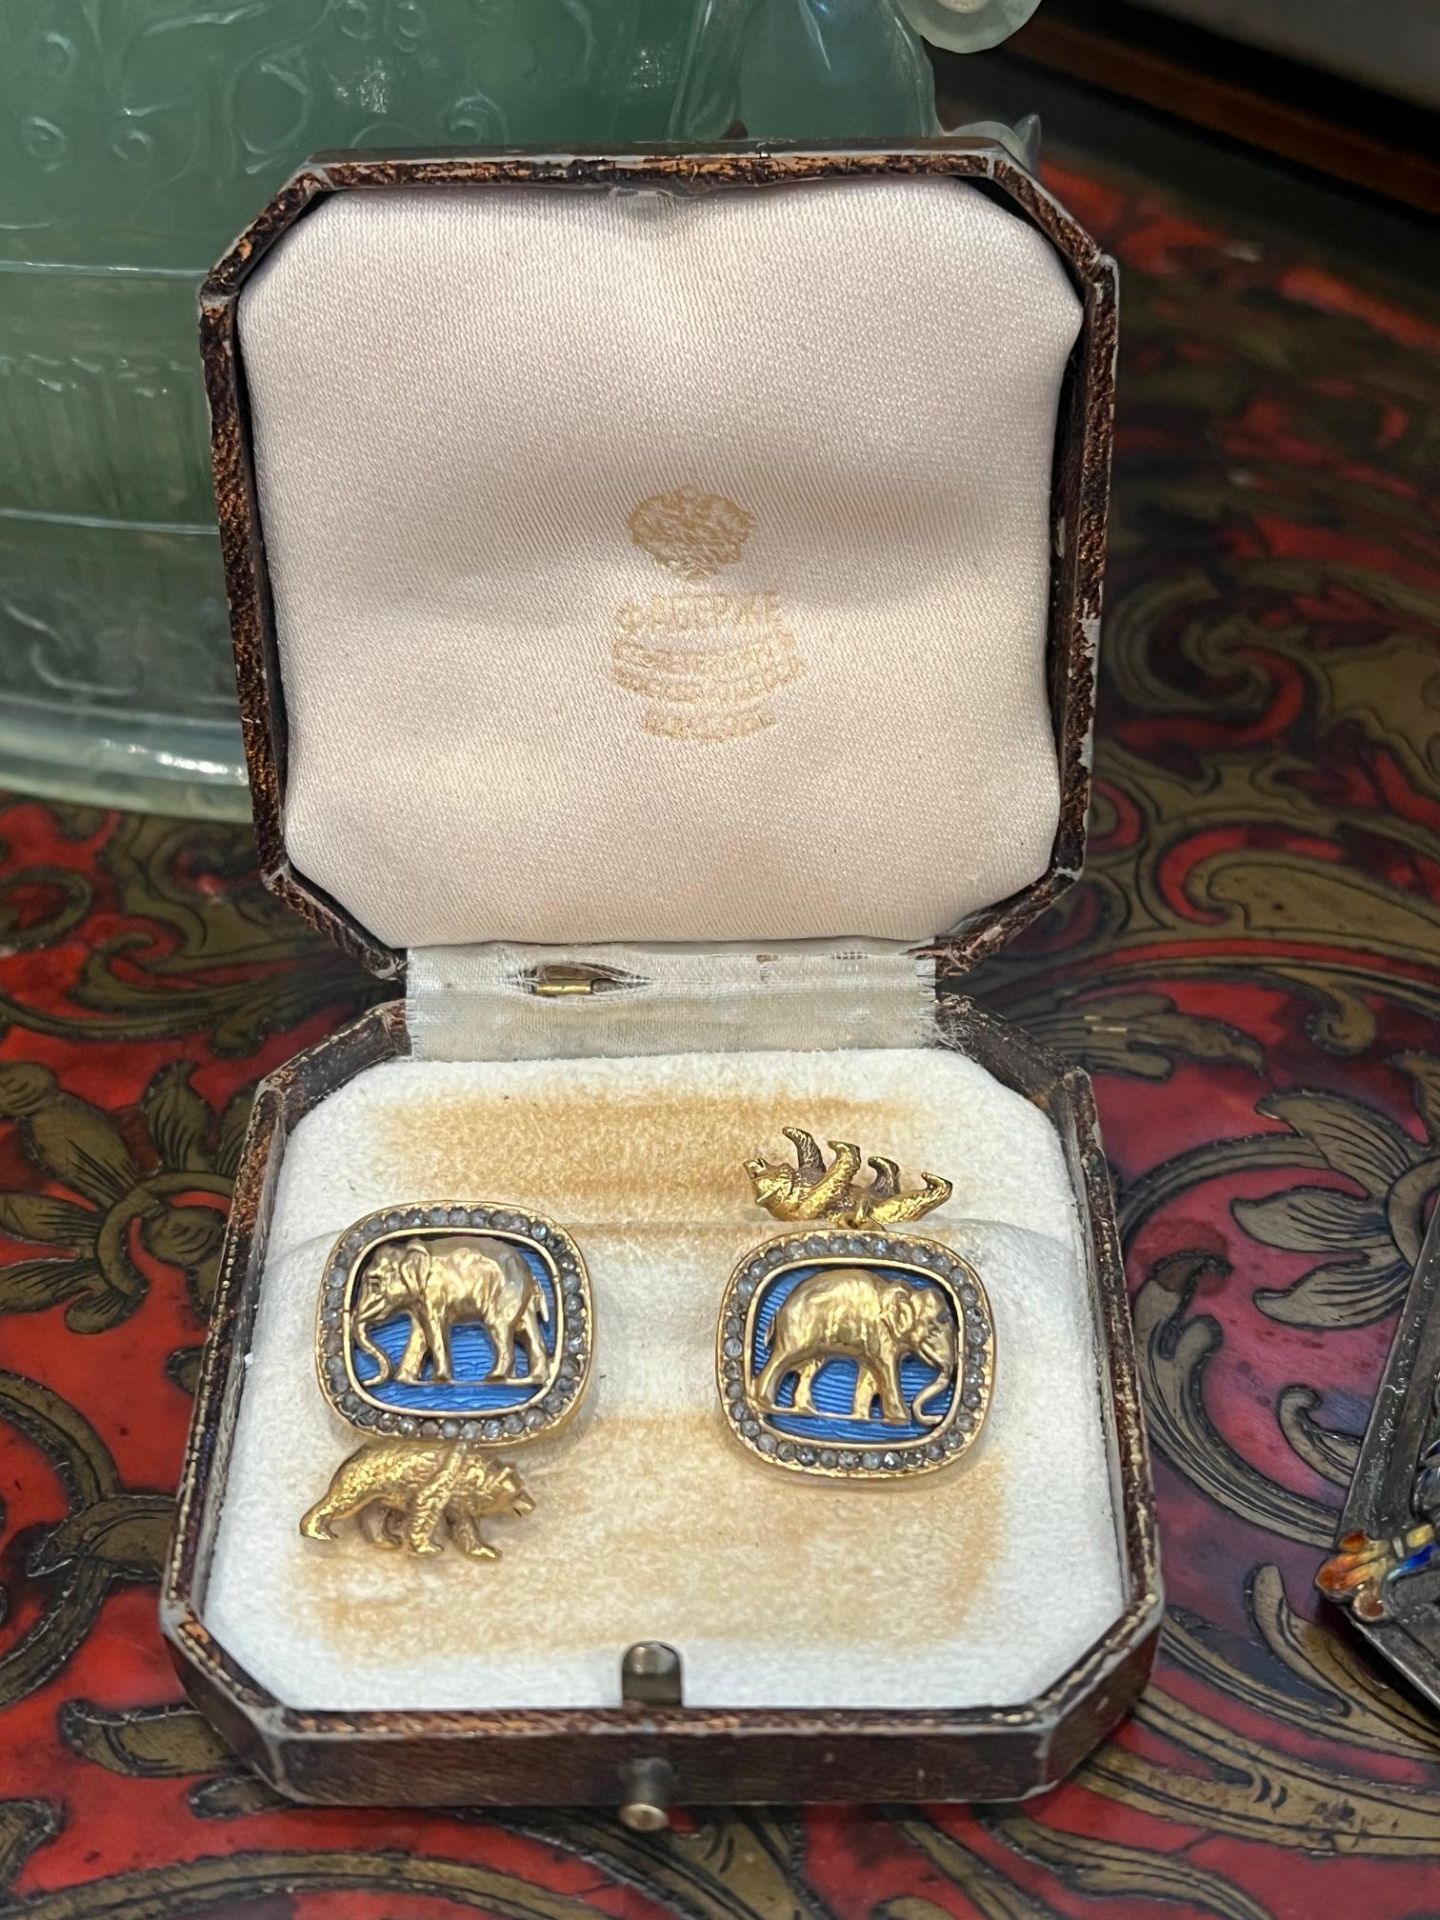 A PAIR OF FABERGE STYLE DIAMOND ENCRUSTED, SILVER GILT AND ENAMELLED CUFFLINKS - Image 13 of 13